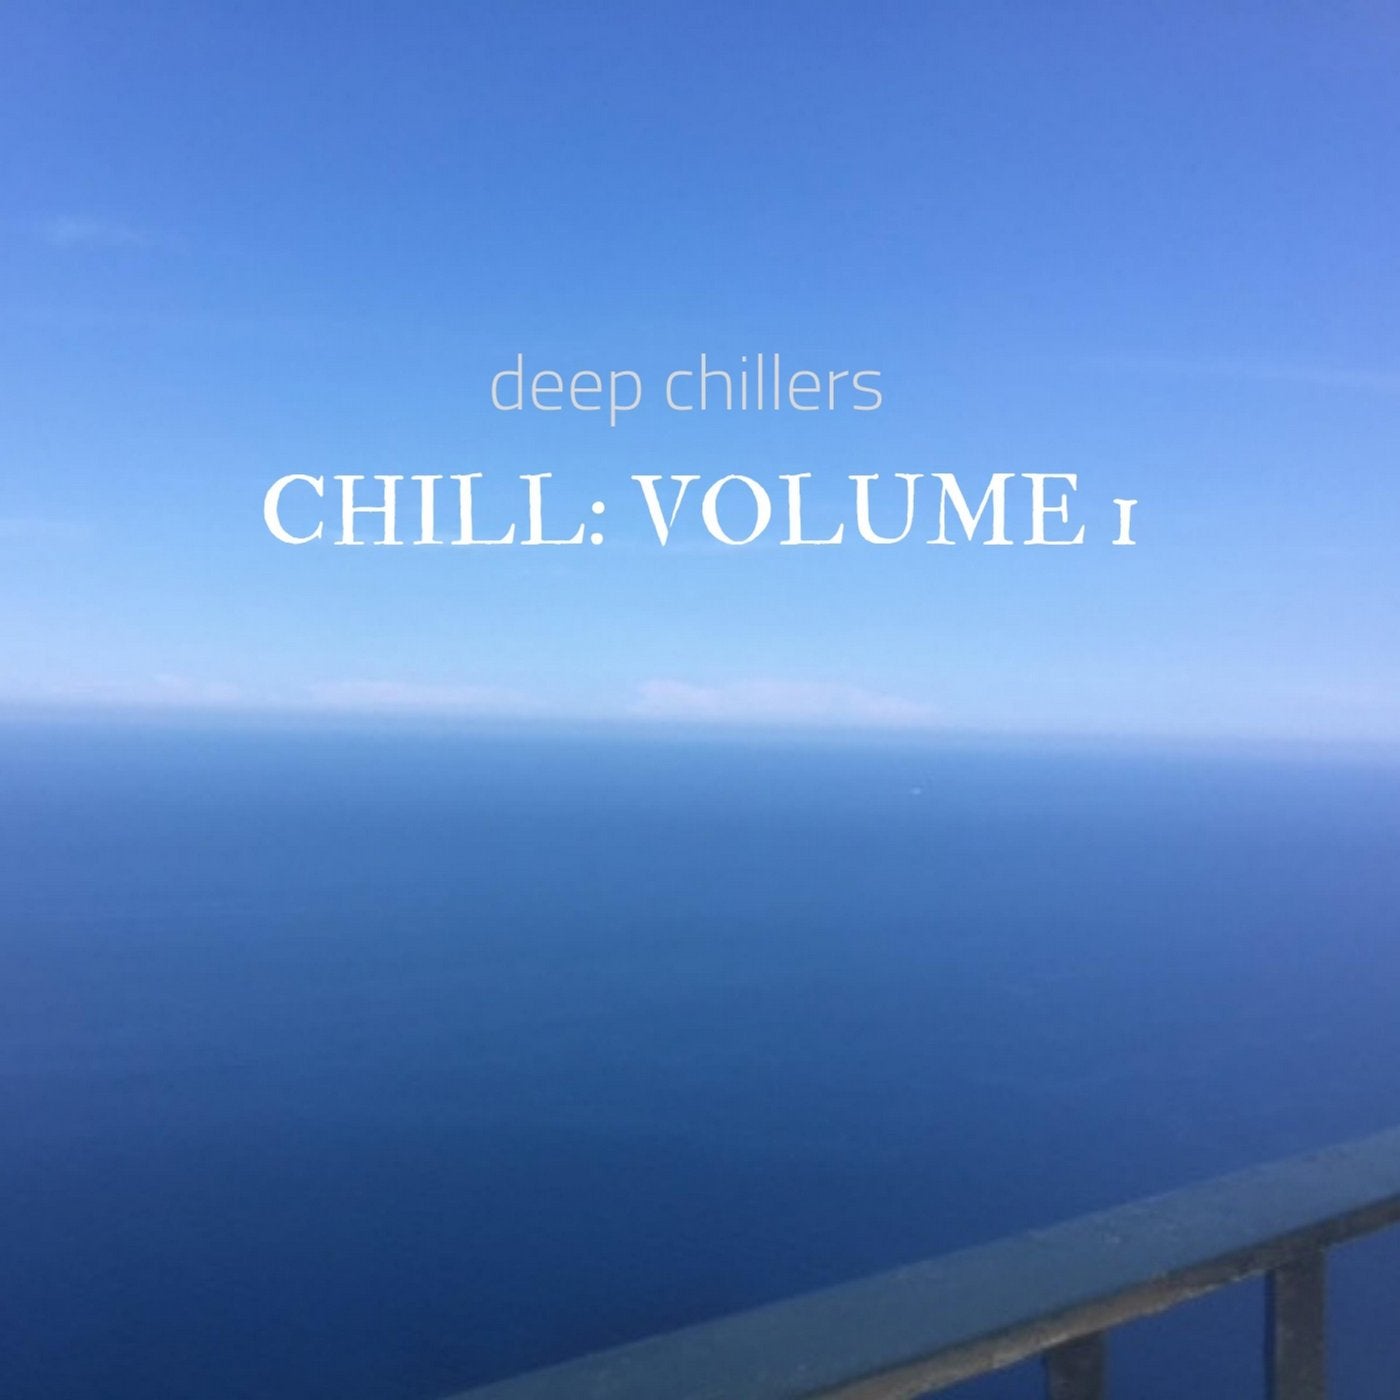 Chill мм2. Чилл ви. Typical Chill Song. Deep Chillers - simp. 7 chill